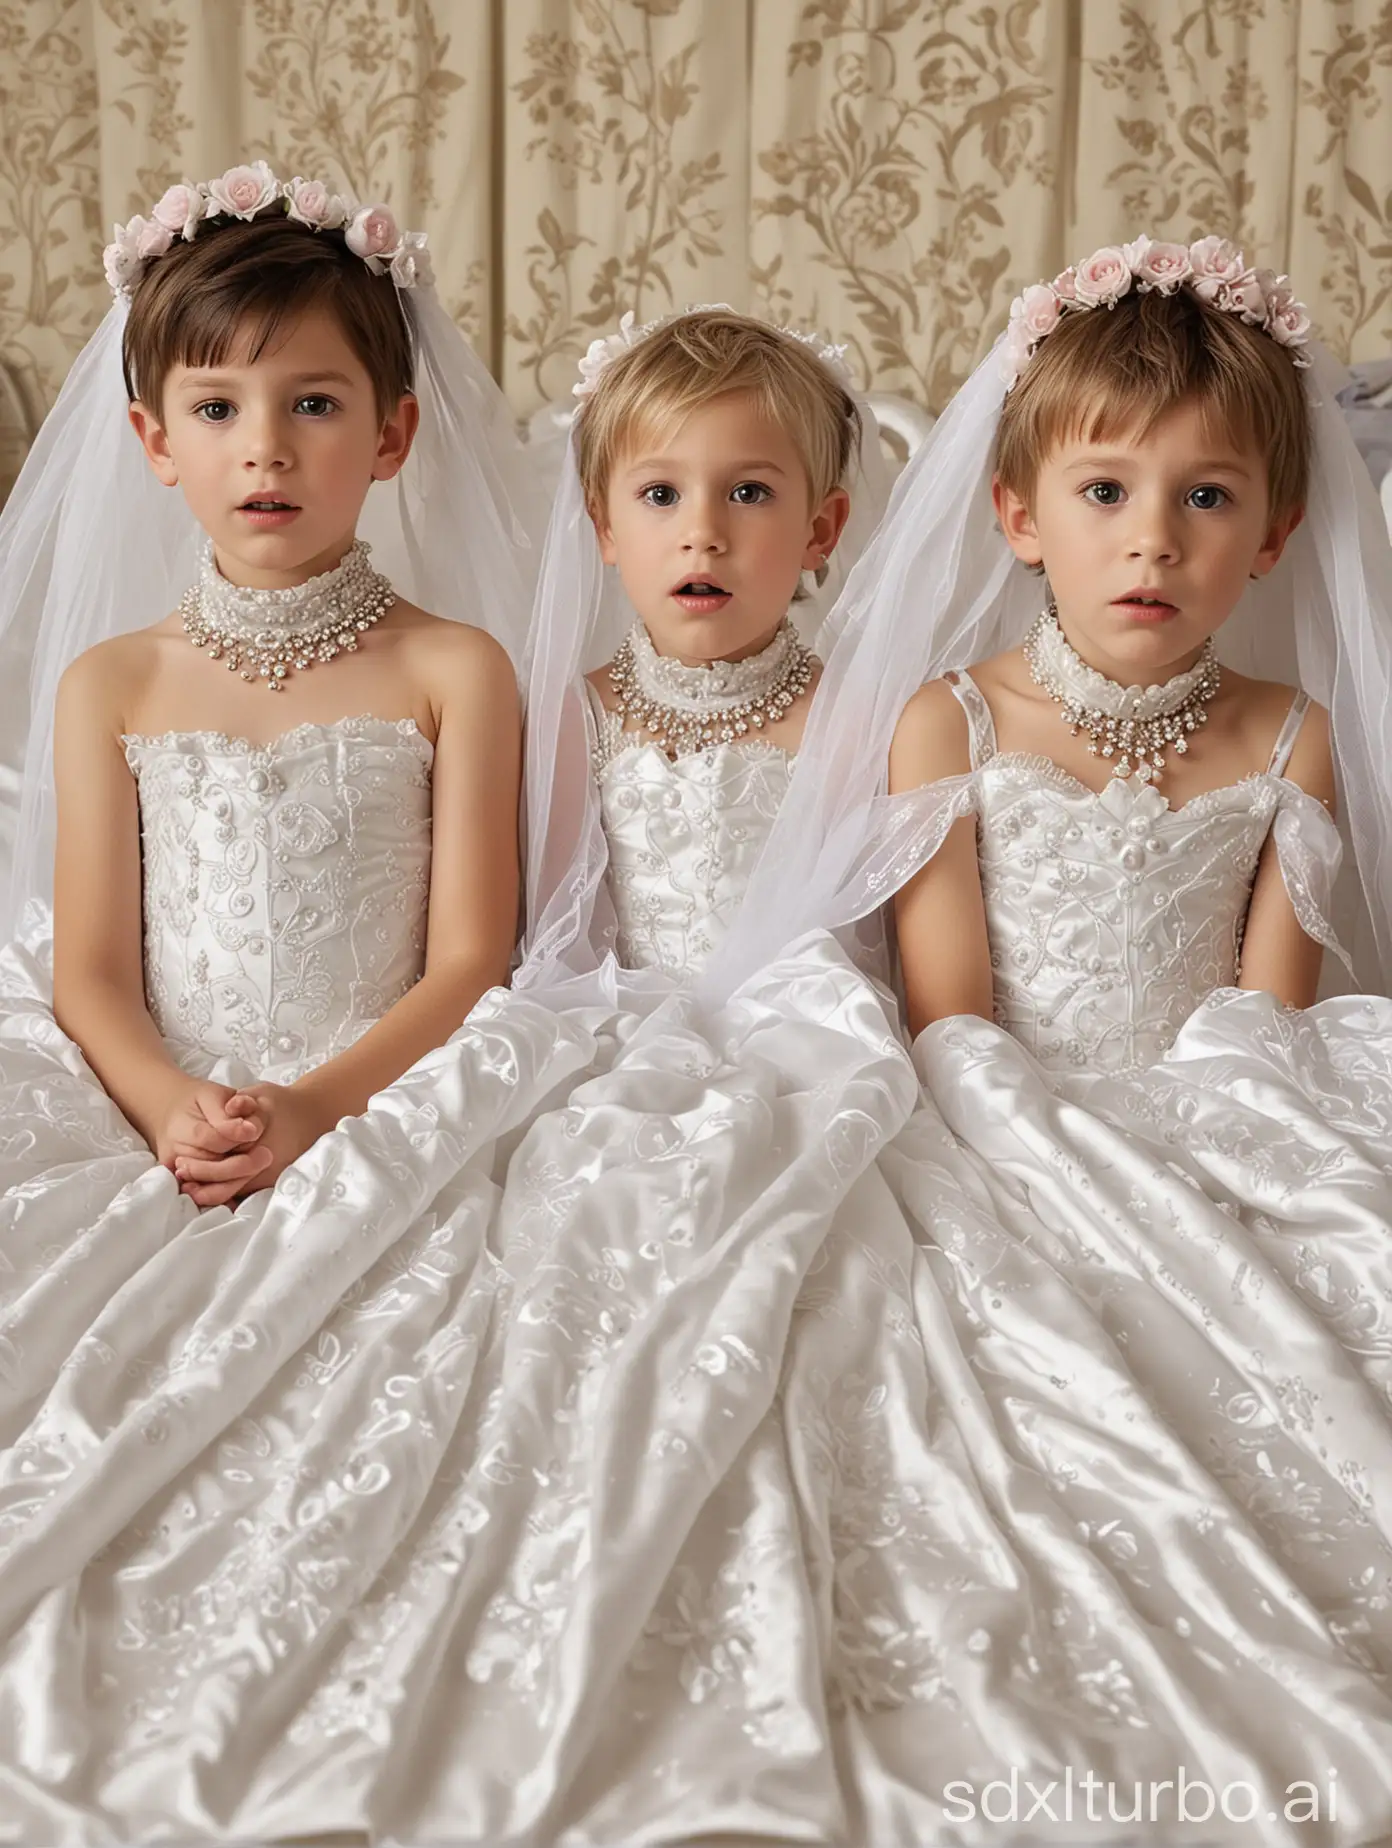 ((Gender role reversal)), 2 cute little boys (a 9-year-old boy and a 6-year-old boy) are waking up in bed, they are tired and confused to find themselves wearing extravagant princess-like wedding dresses with flowery textures and veils, choker necklaces with spikes on, short smart hair, they are looking down at their clothes, energetic